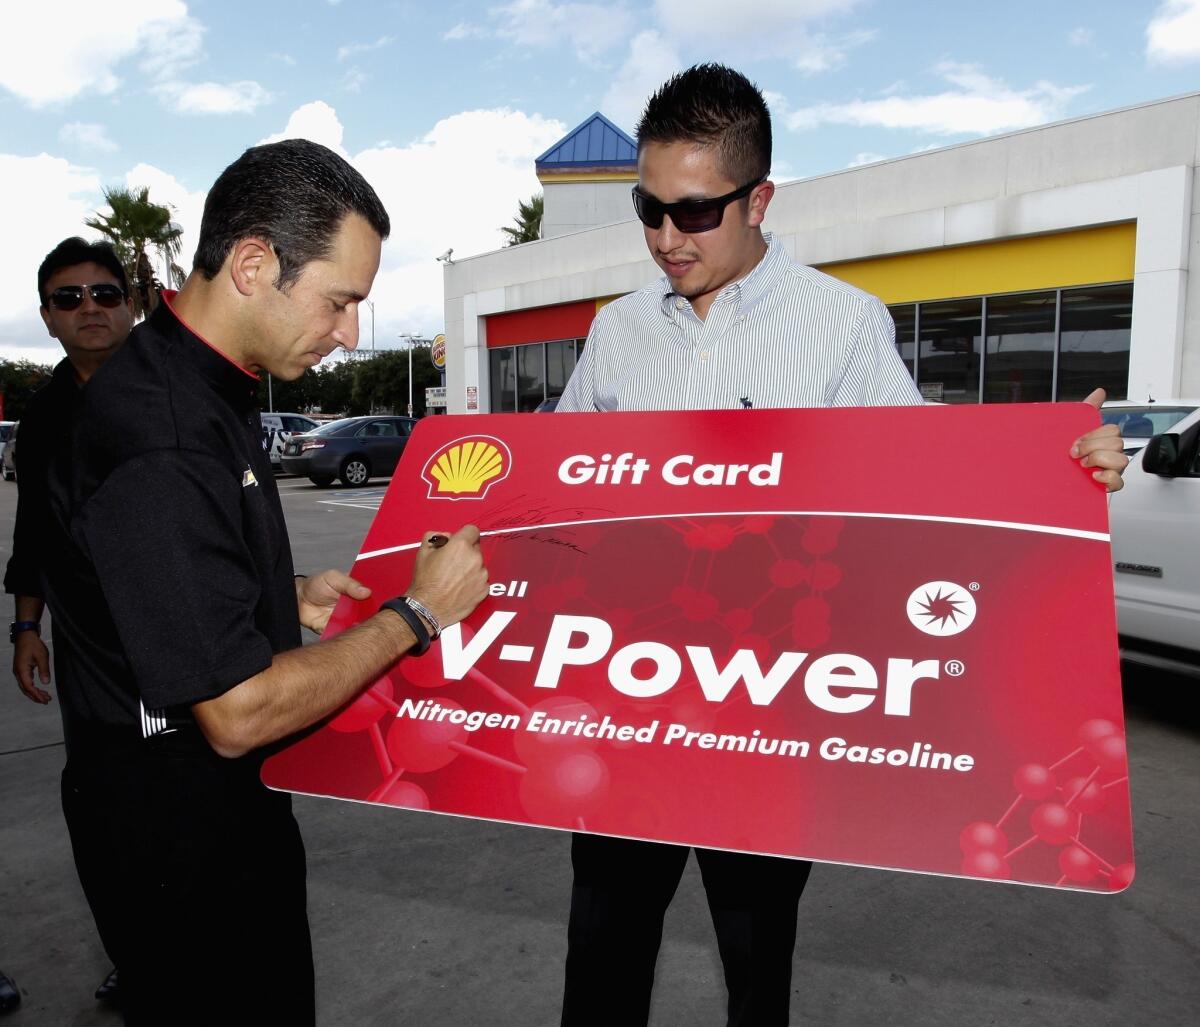 IndyCar driver Helio Castroneves surprises fans with free fuel and prizes during an event before the Grand Prix of Houston.